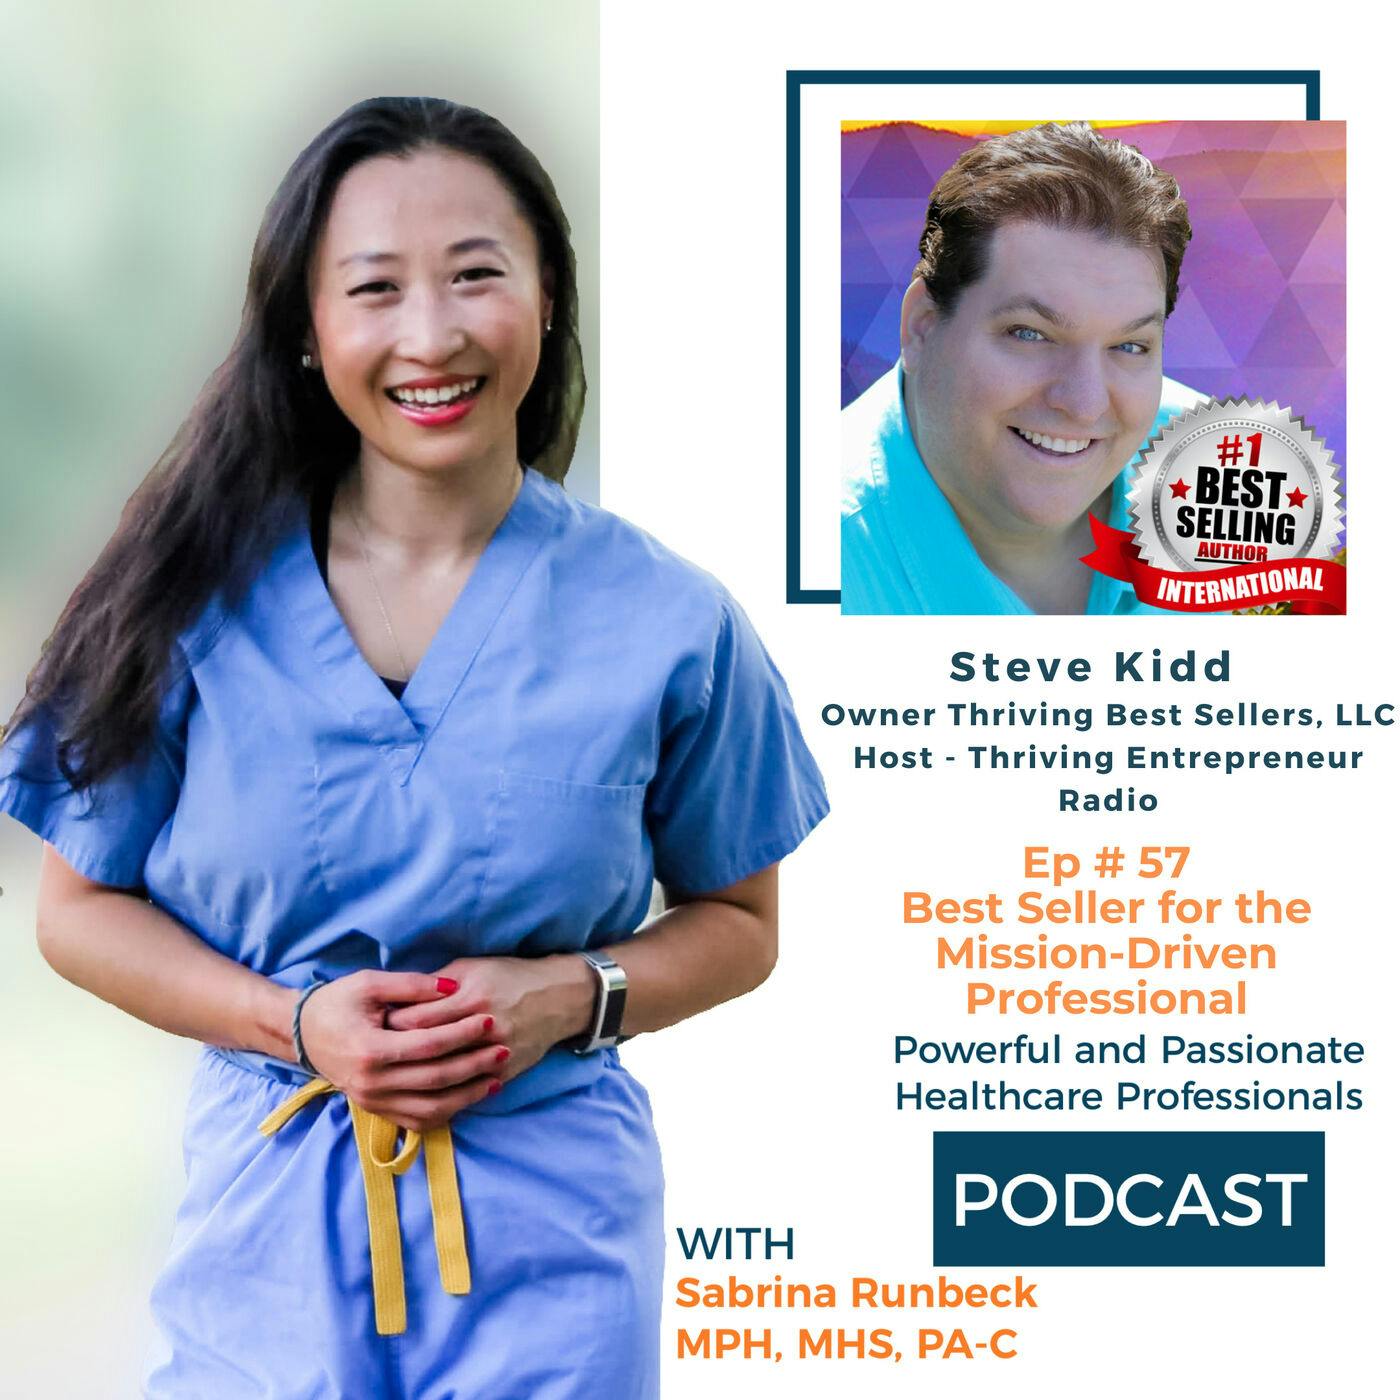 Ep 57 – Best Seller for the Mission-Driven Professional with Steve Kidd